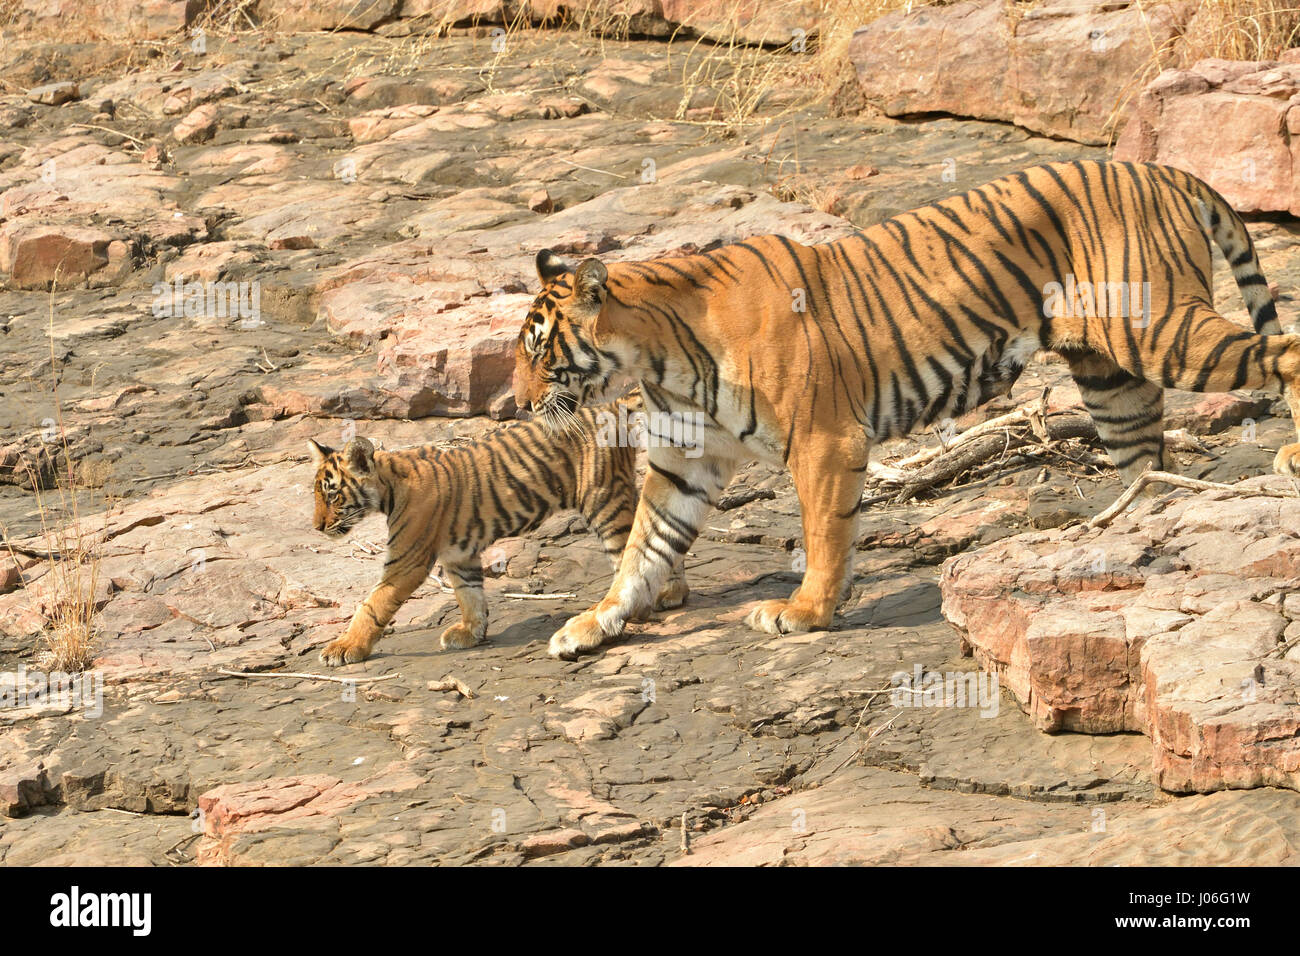 Bengal tiger, mother and cub, walking on a rocky outcrop in Ranthambhore tiger reserve, India Stock Photo